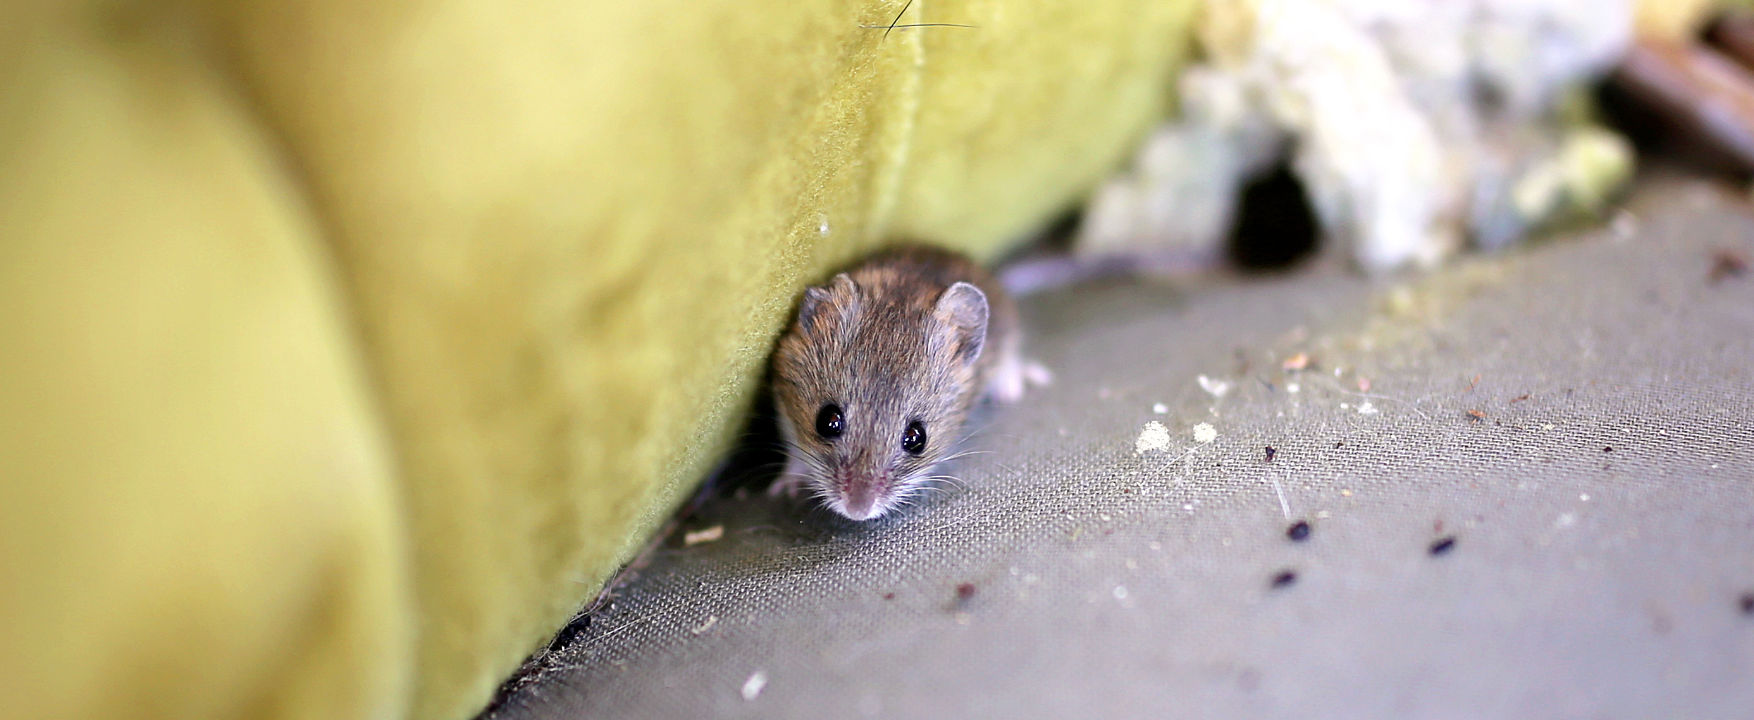 A mouse on the couch means its time for rodent control adelaide pest exterminator